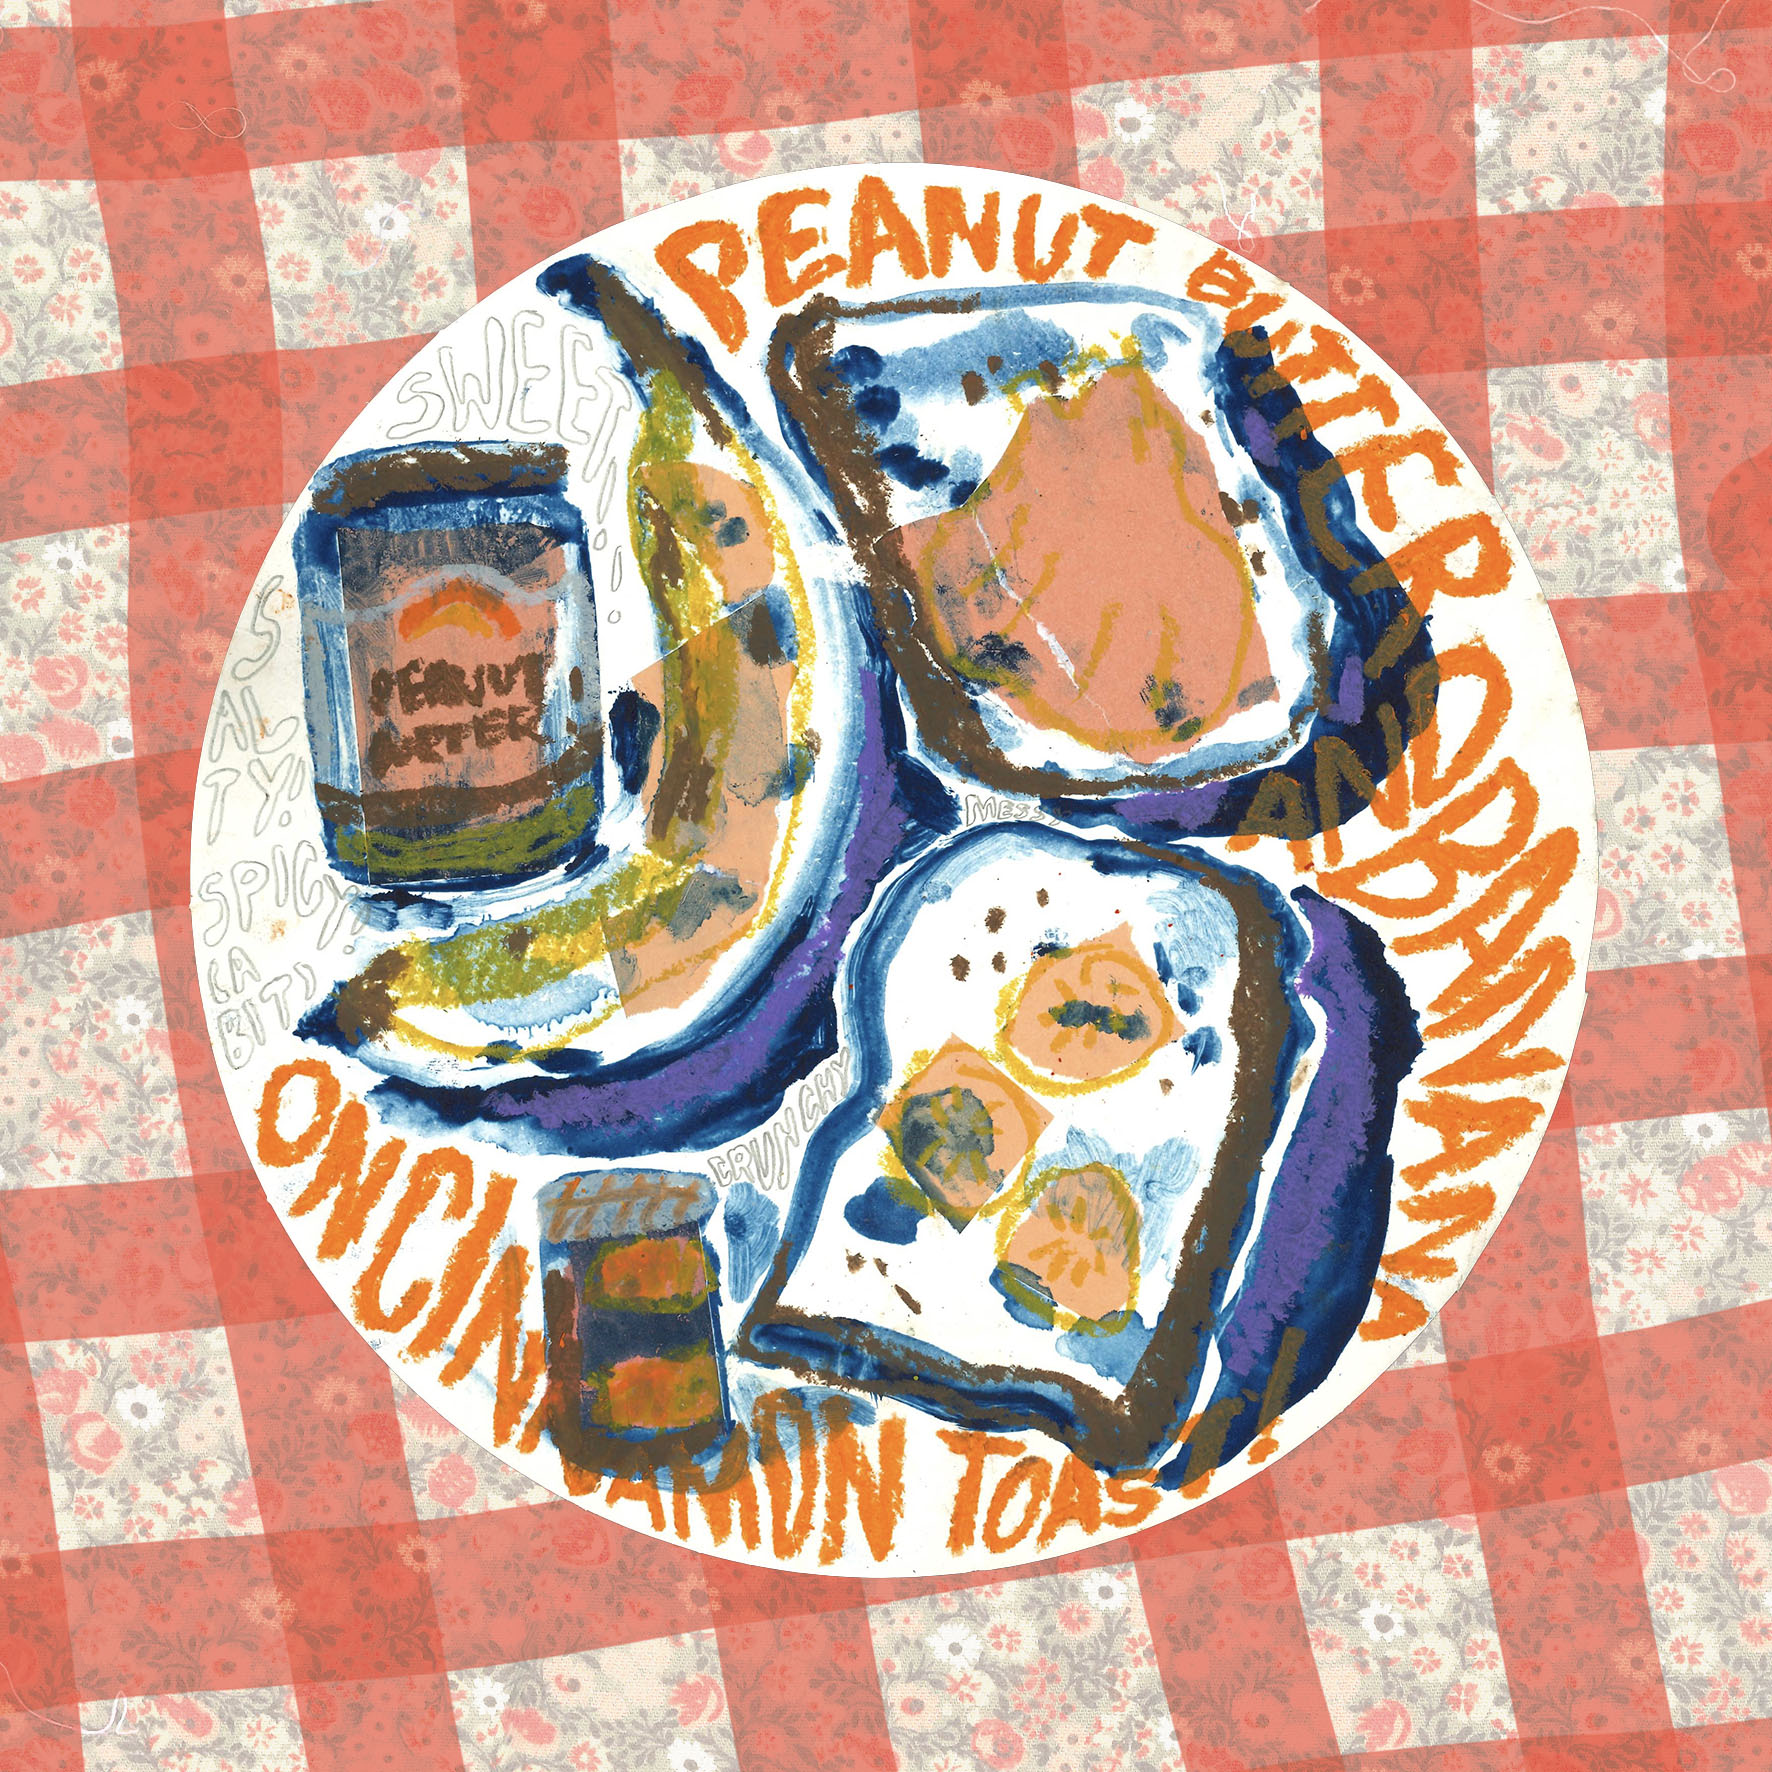 A mixed-media mono-print depicting a banana, a jar of peanut butter and ground cinnamon, and two pieces of toast with peanut butter. The main colours are blue, orange, yellow, and purple. The work is embellished with several pieces of text, most importantly 'peanut butter and banana on cinnamon toast!'.